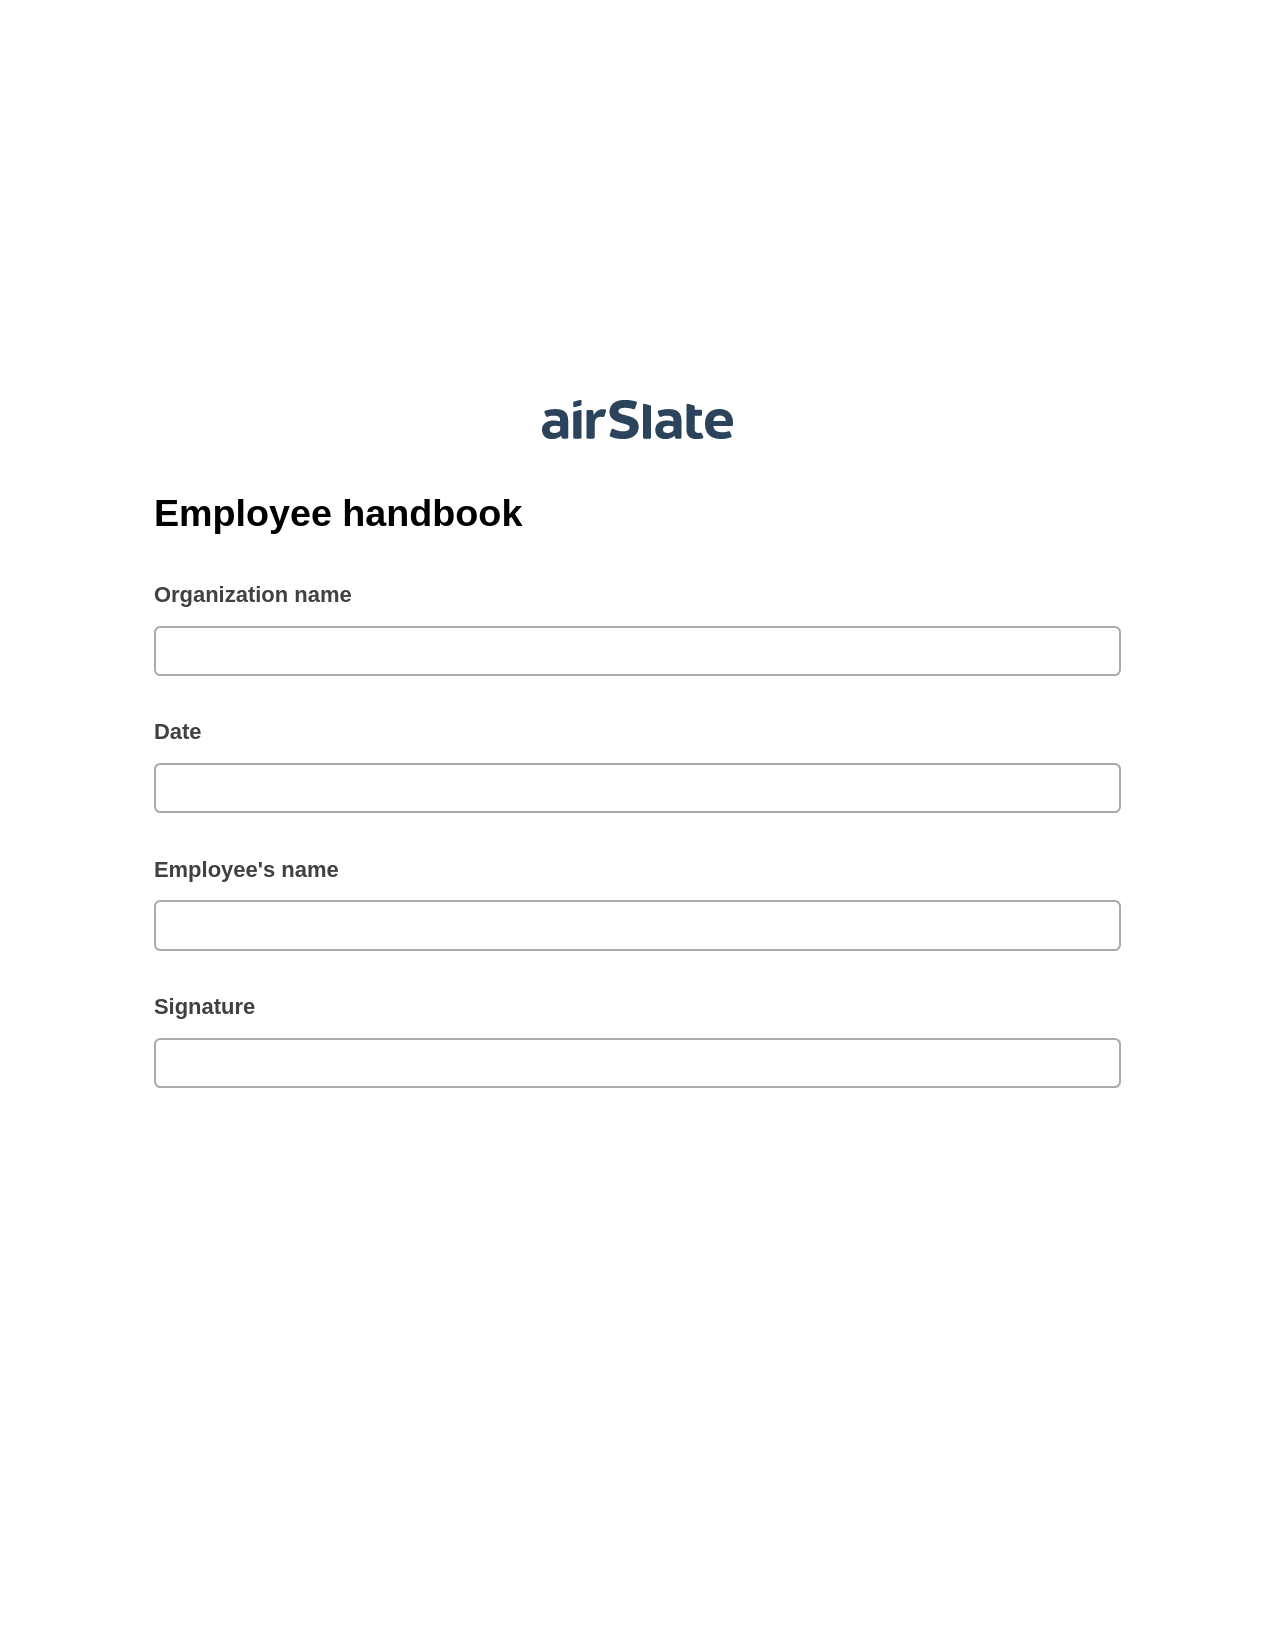 Employee handbook Pre-fill Dropdown from Airtable, Add Tags to Slate Bot, Box Bot